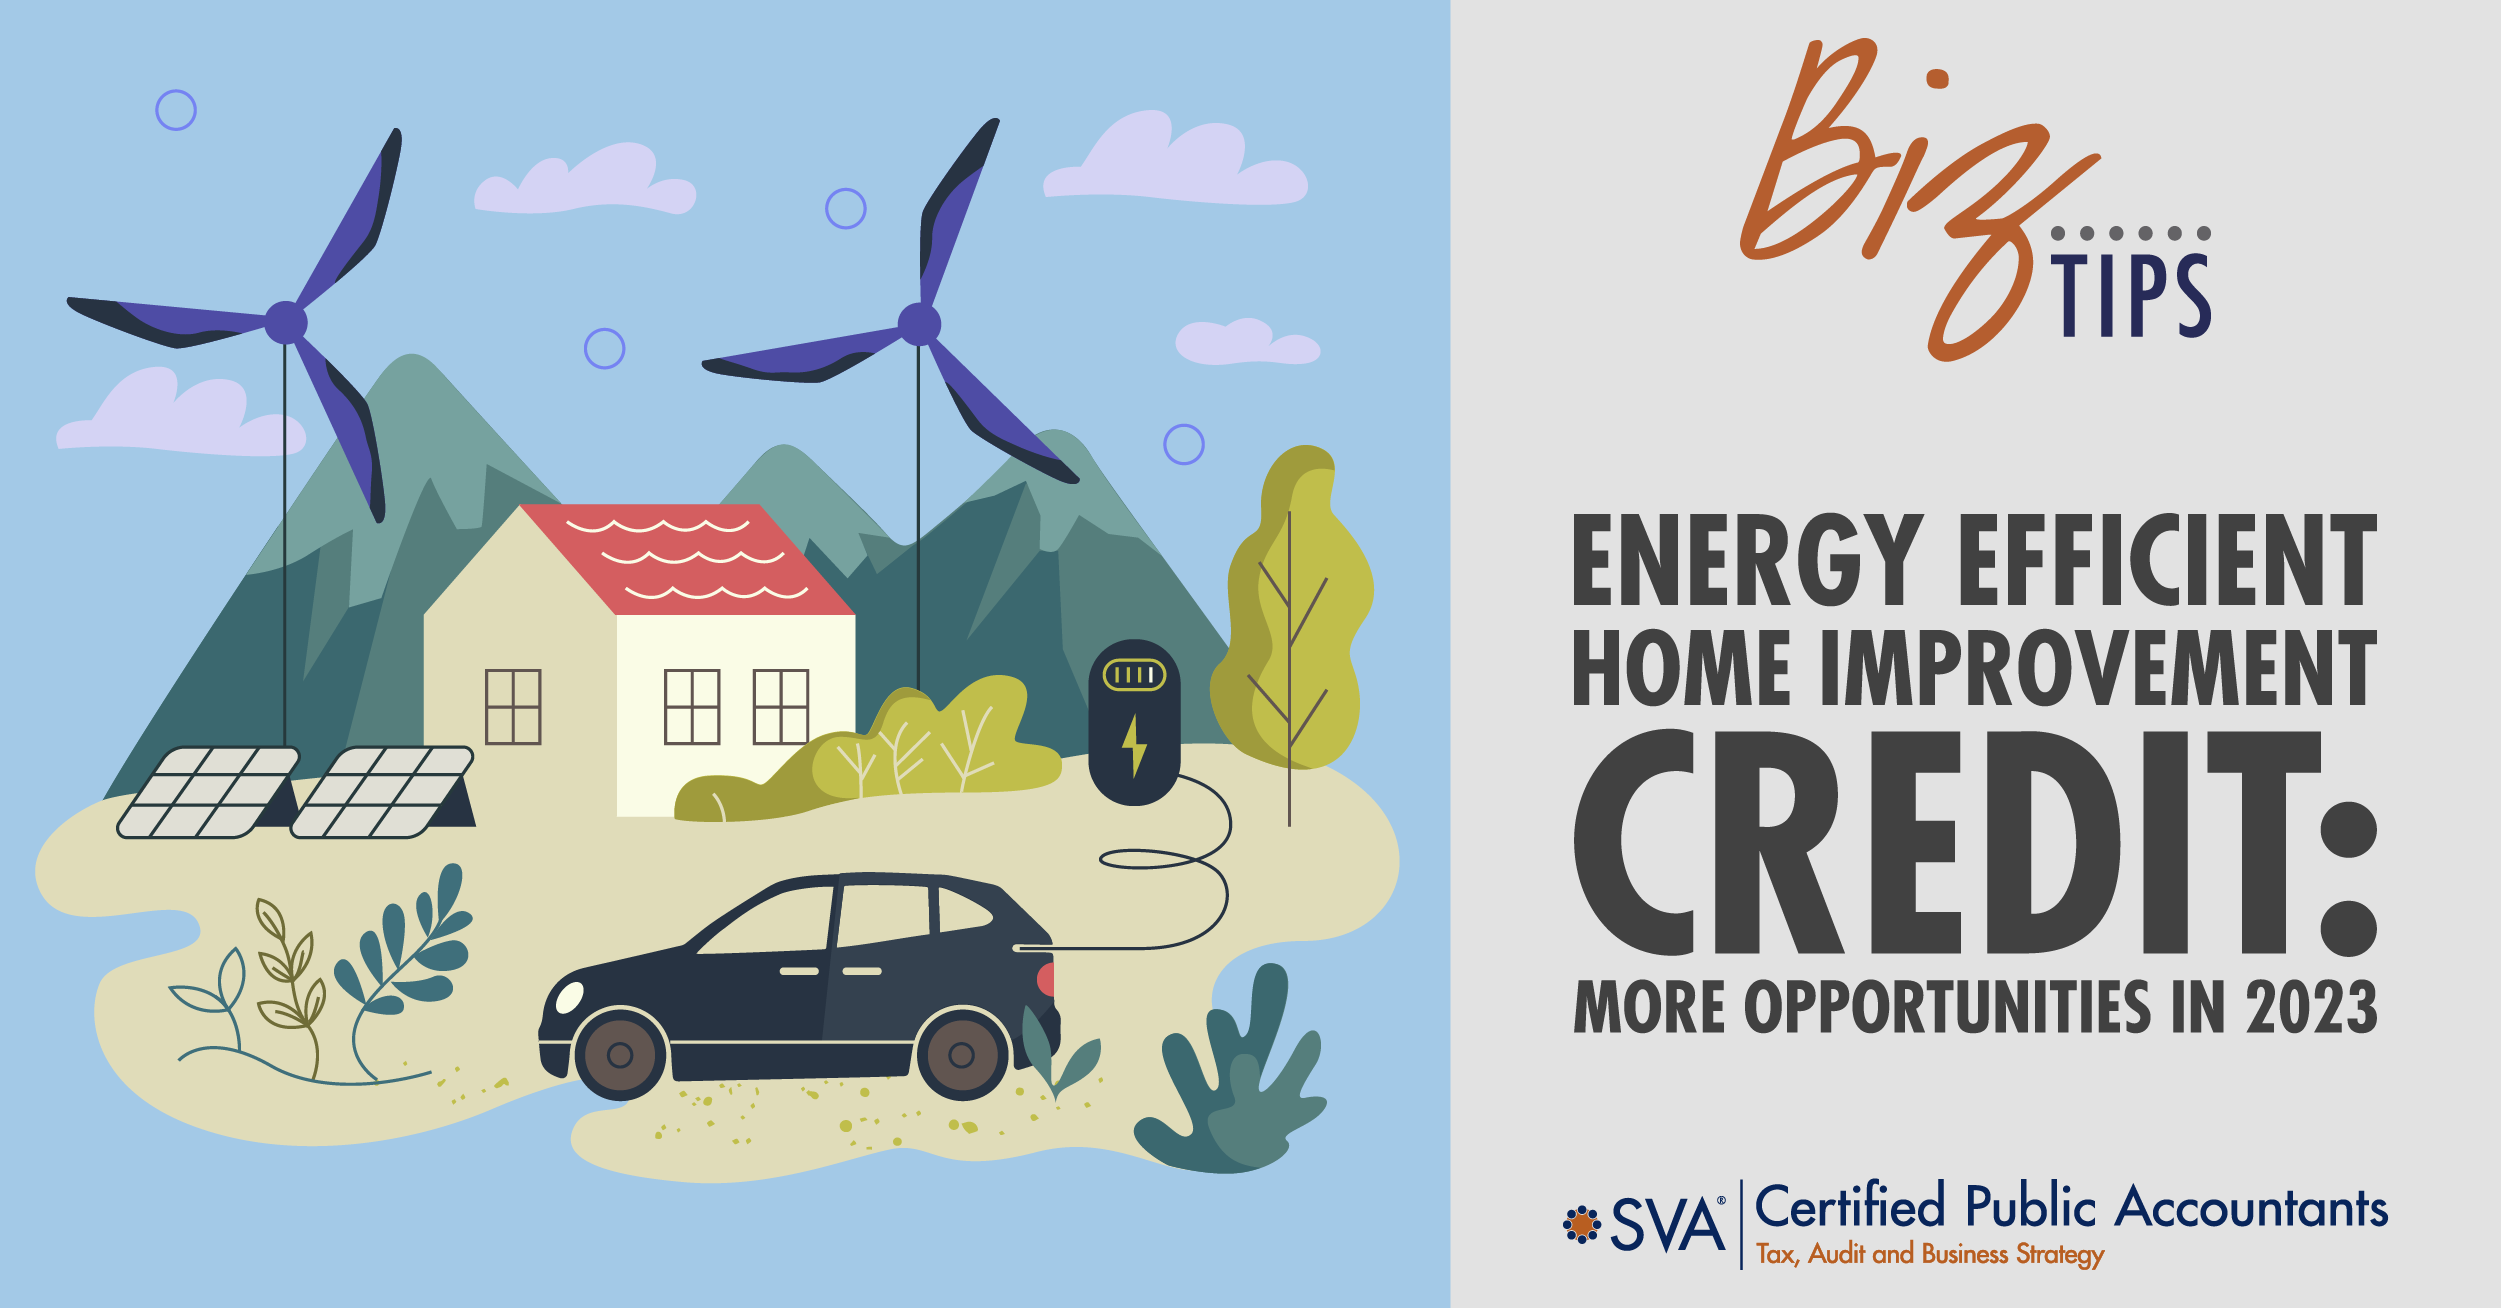 Energy Efficient Home Improvement Credit: More Opportunity in 2023